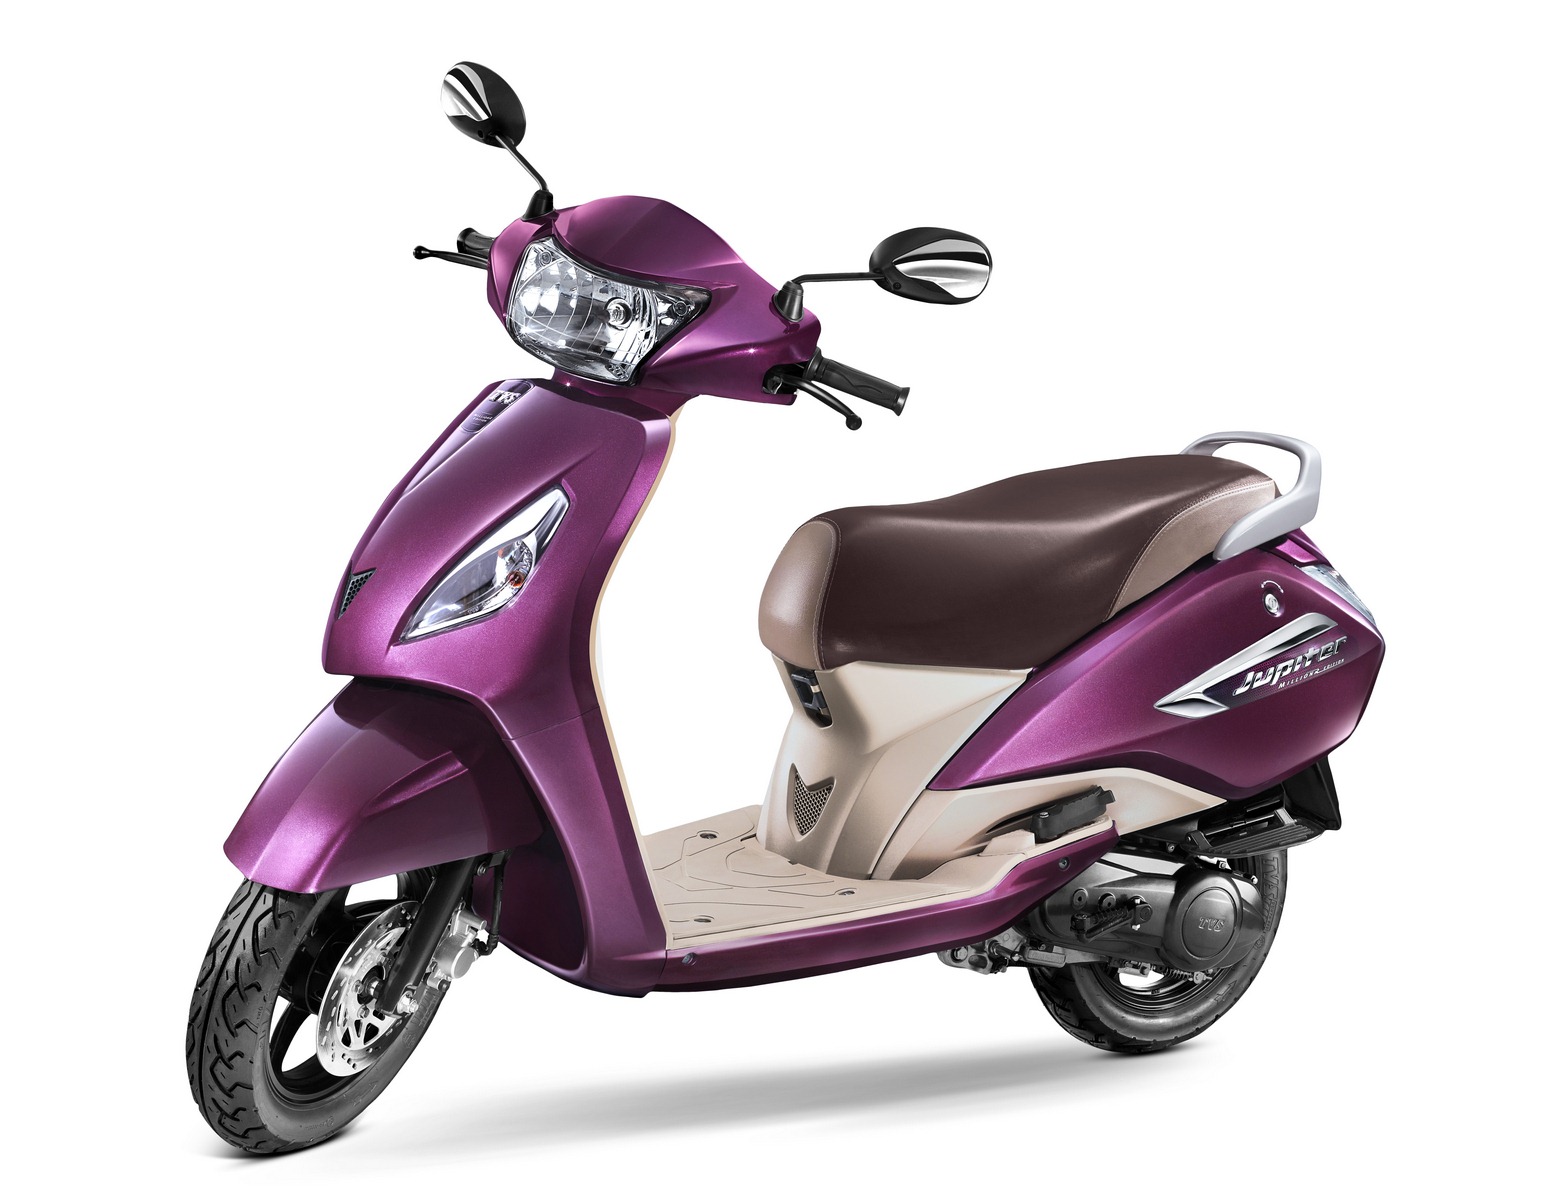 TVS Jupiter MillionR Limited Edition Launched In India At Rs. 53,034 (Ex-Showroom, Delhi)